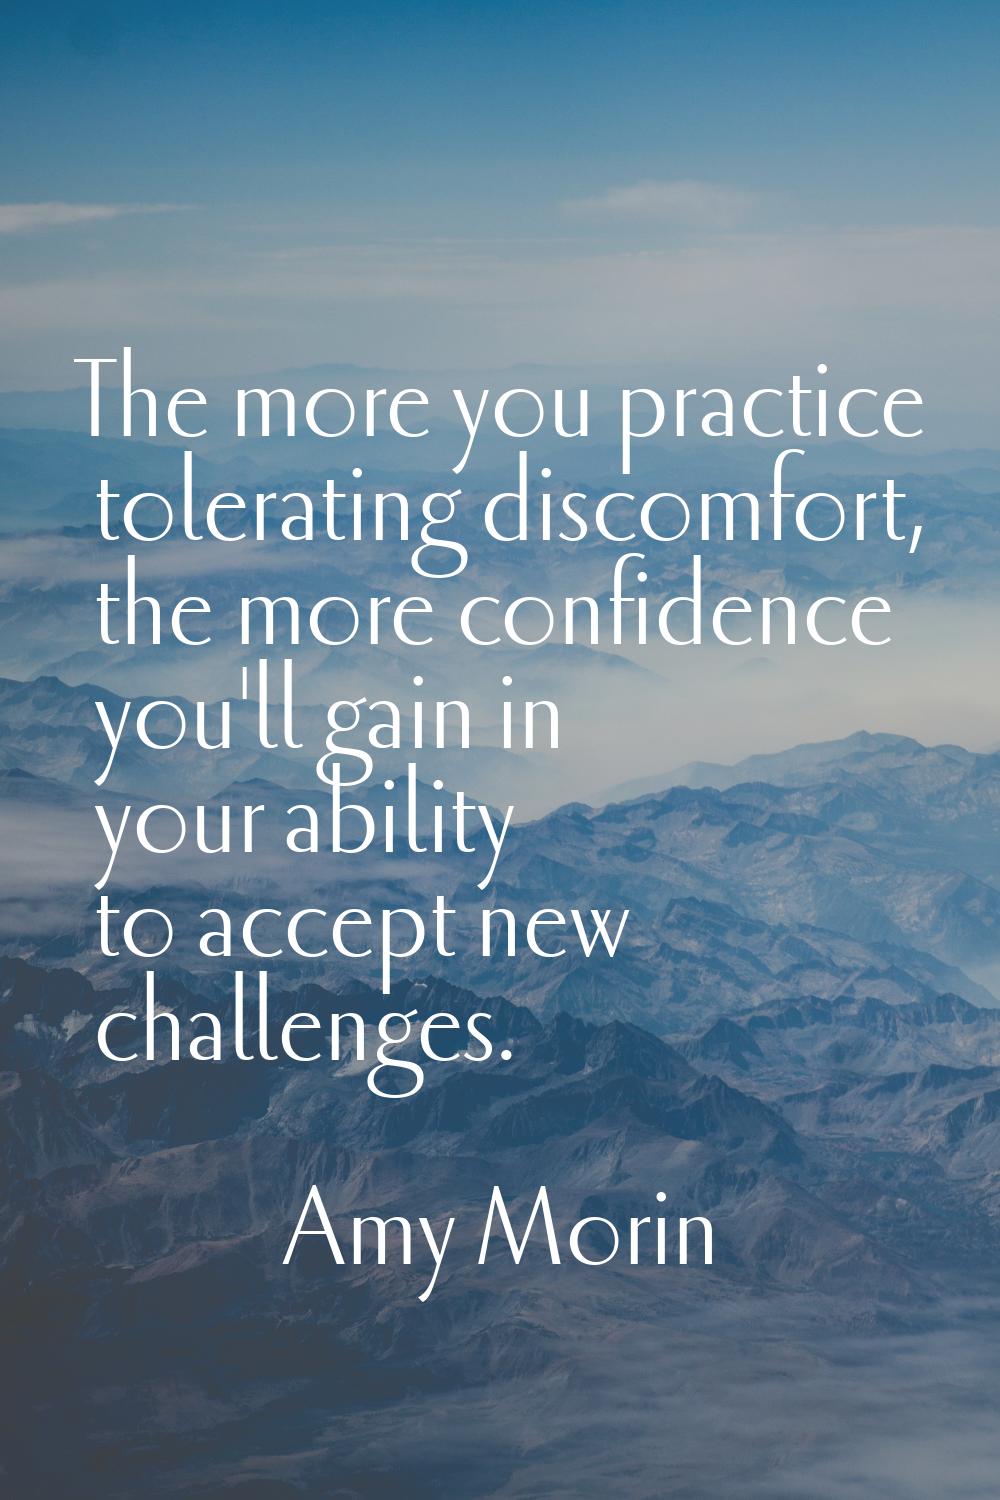 The more you practice tolerating discomfort, the more confidence you'll gain in your ability to acc